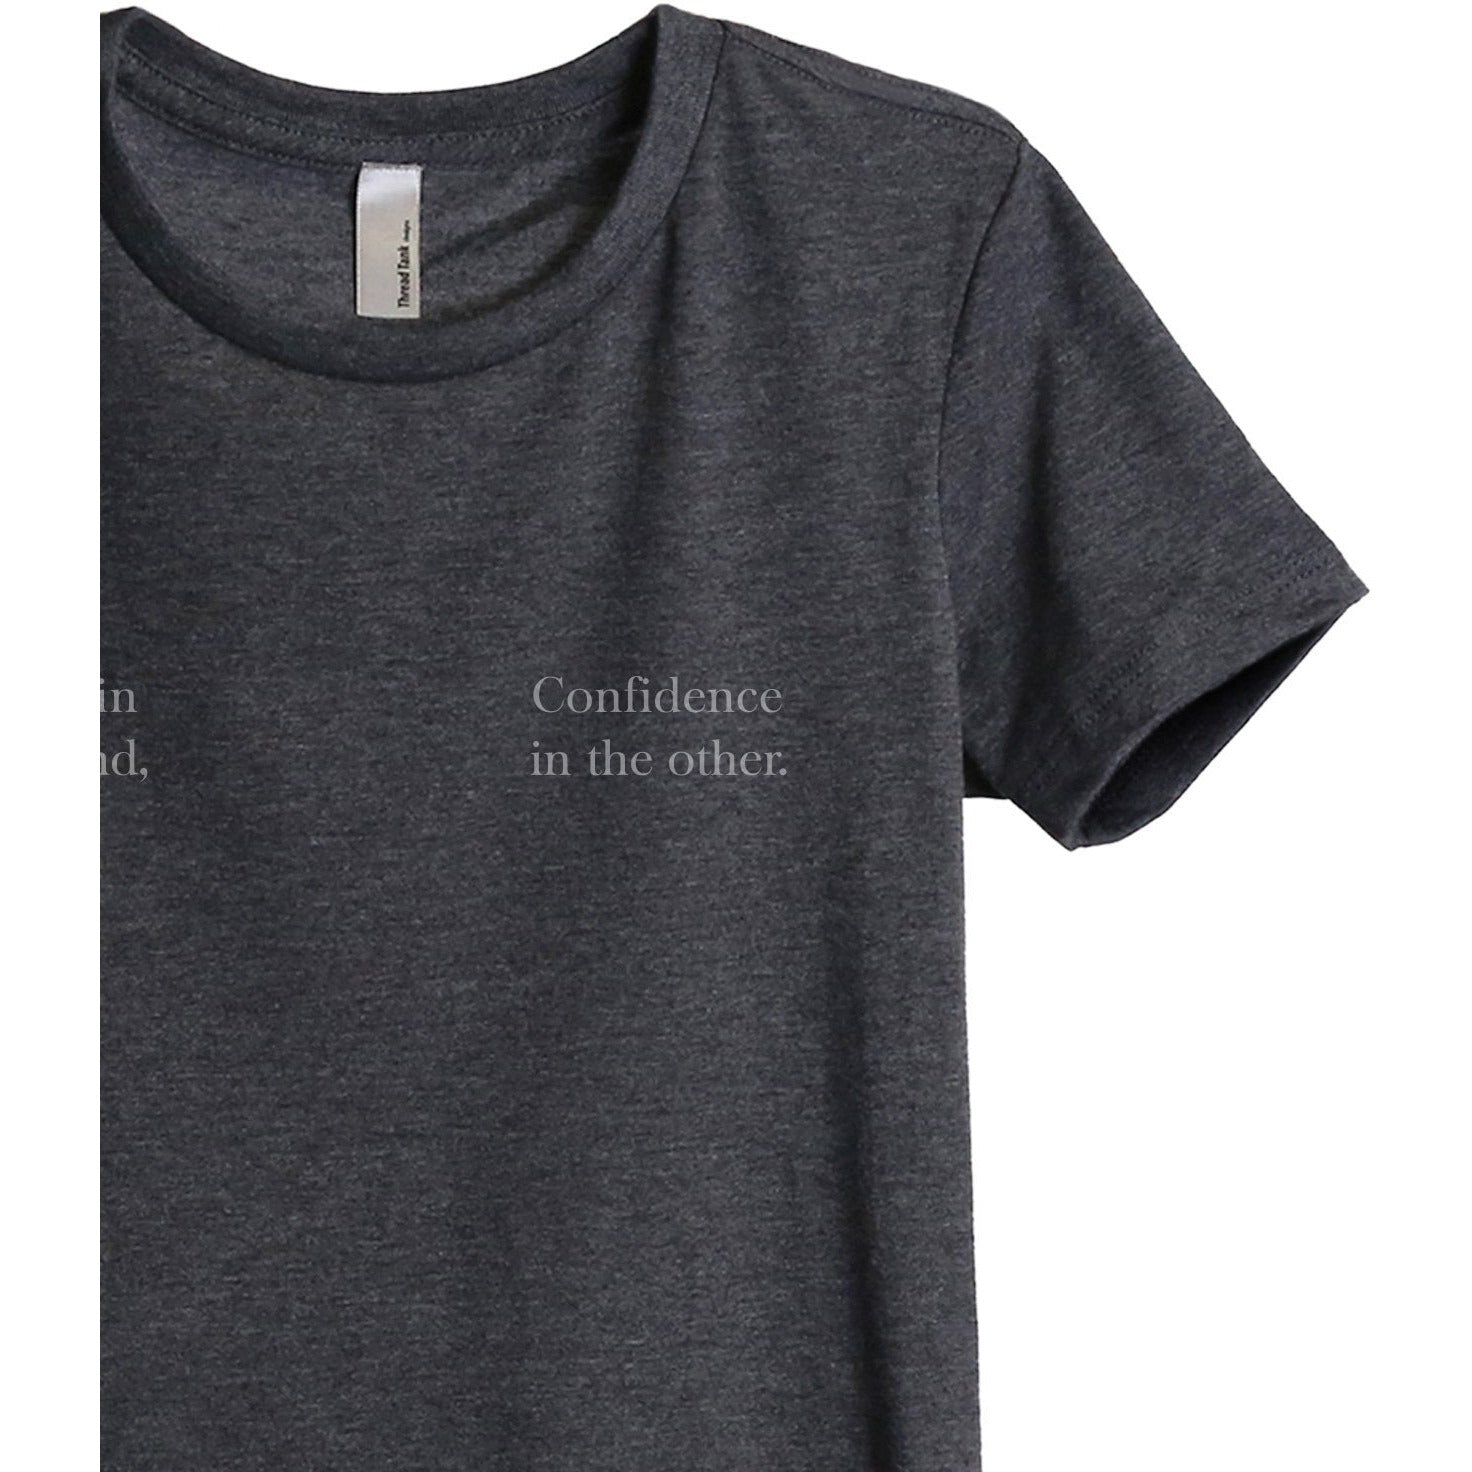 Coffee In One Hand Confidence Other Women's Relaxed Crewneck T-Shirt Top Tee Charcoal Grey
